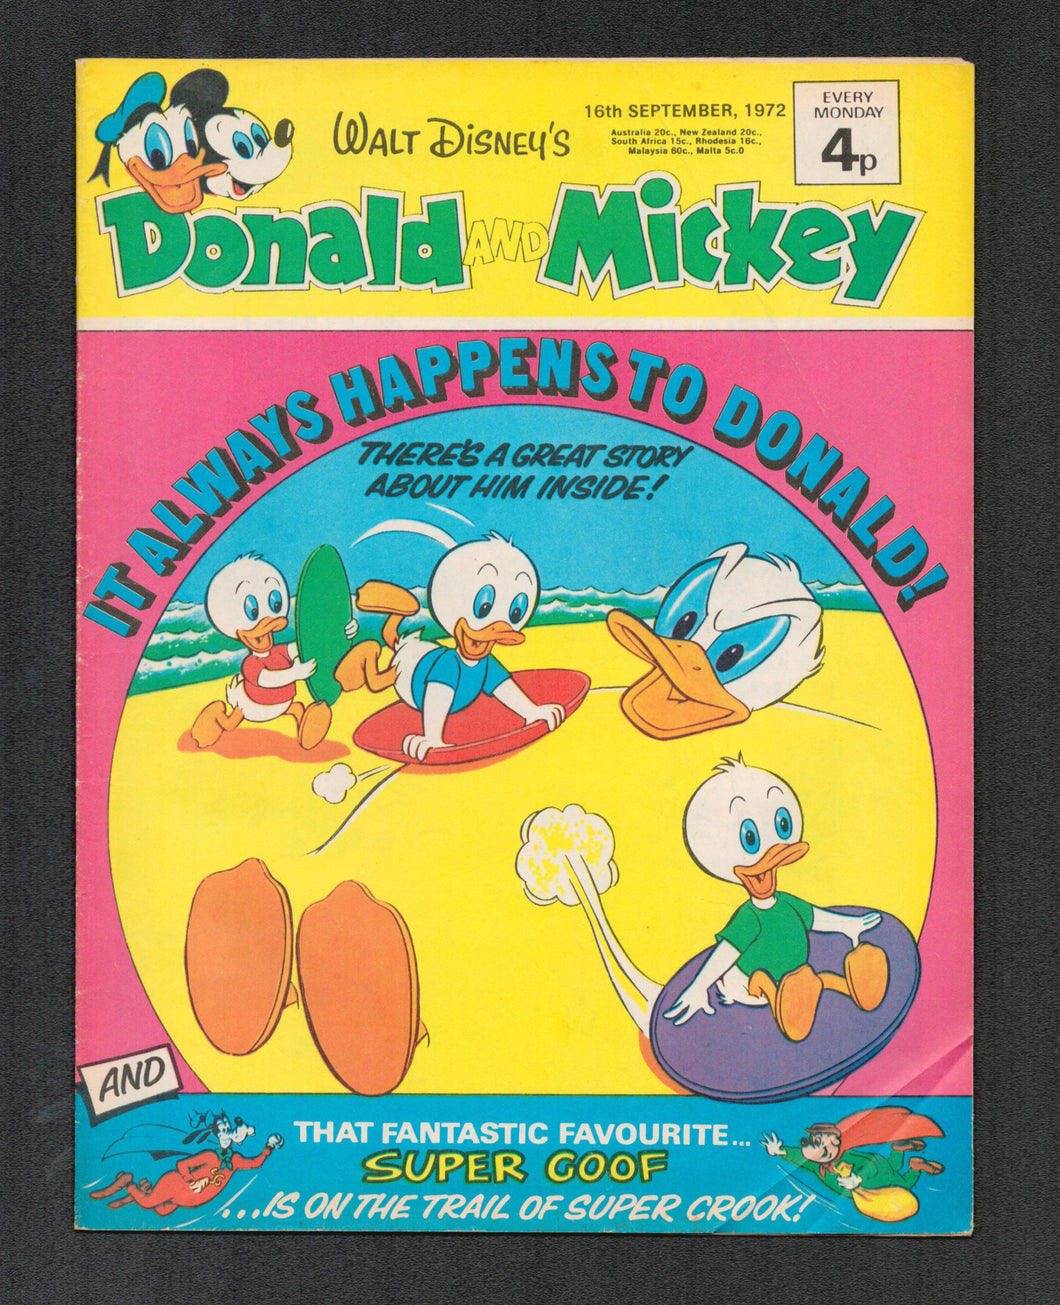 Donald and Mickey Sept 16 1972